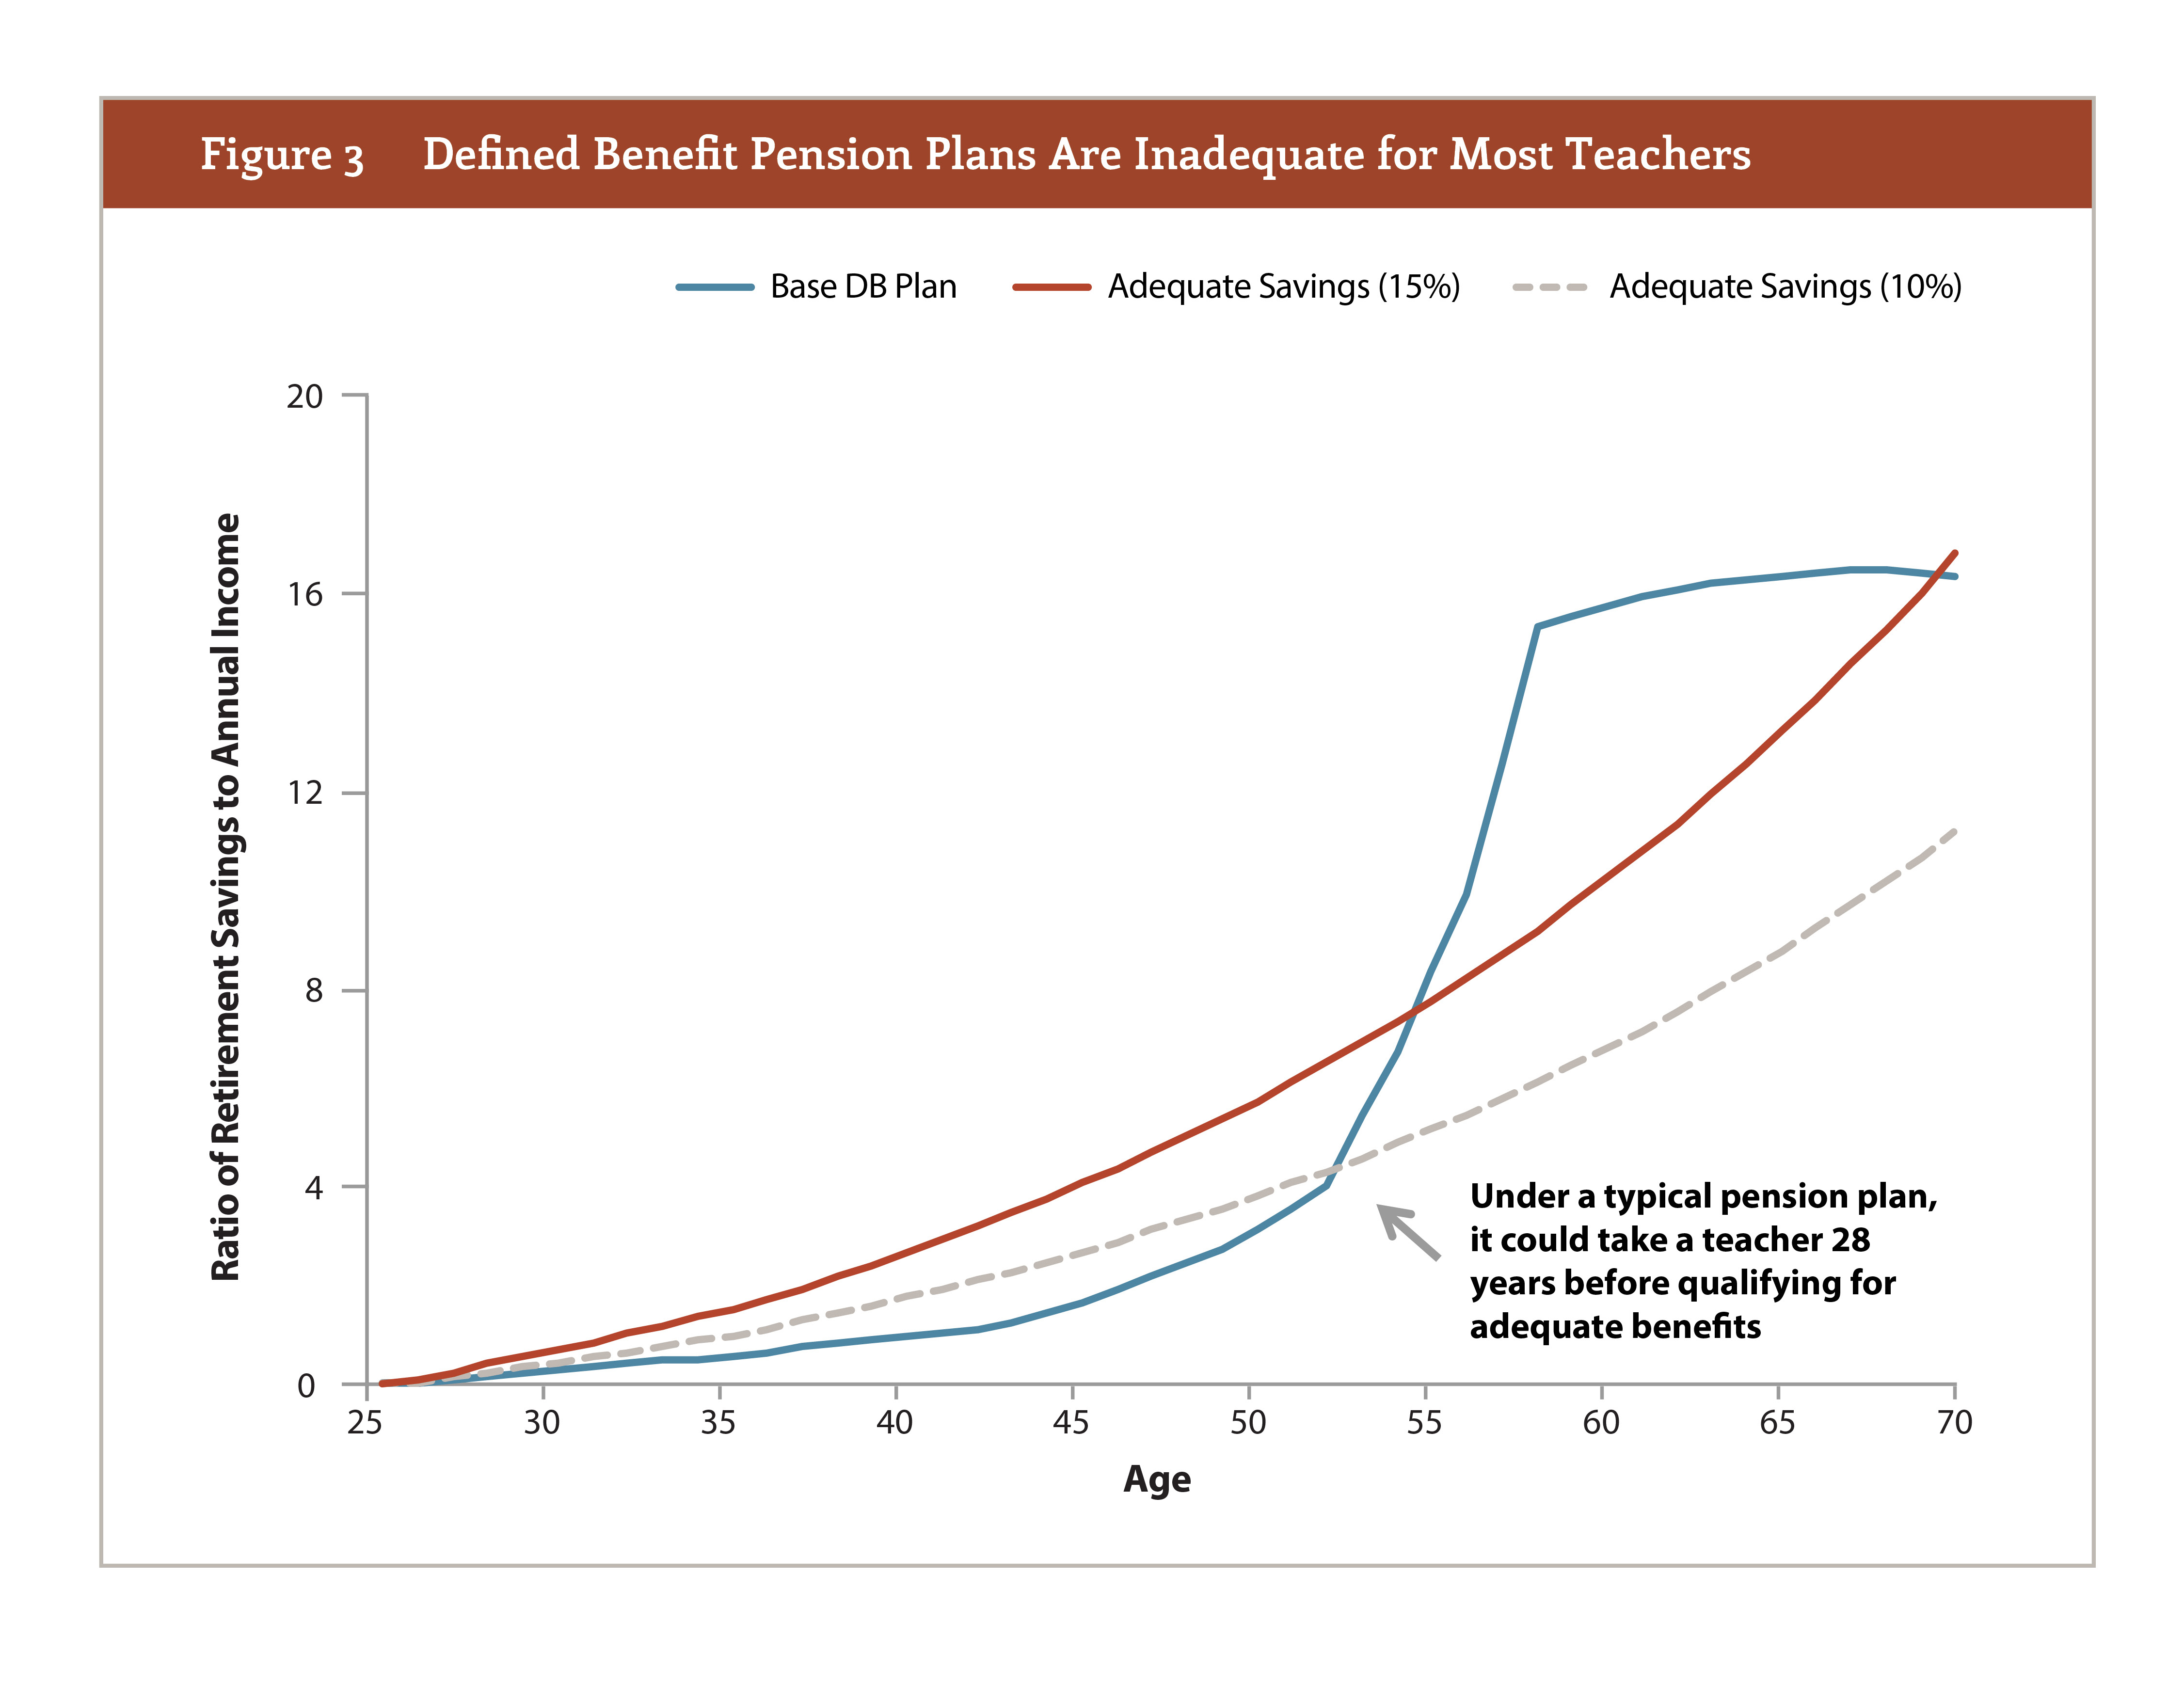 Defined Benefit Pension Plans Are Inadequate for Most Teachers